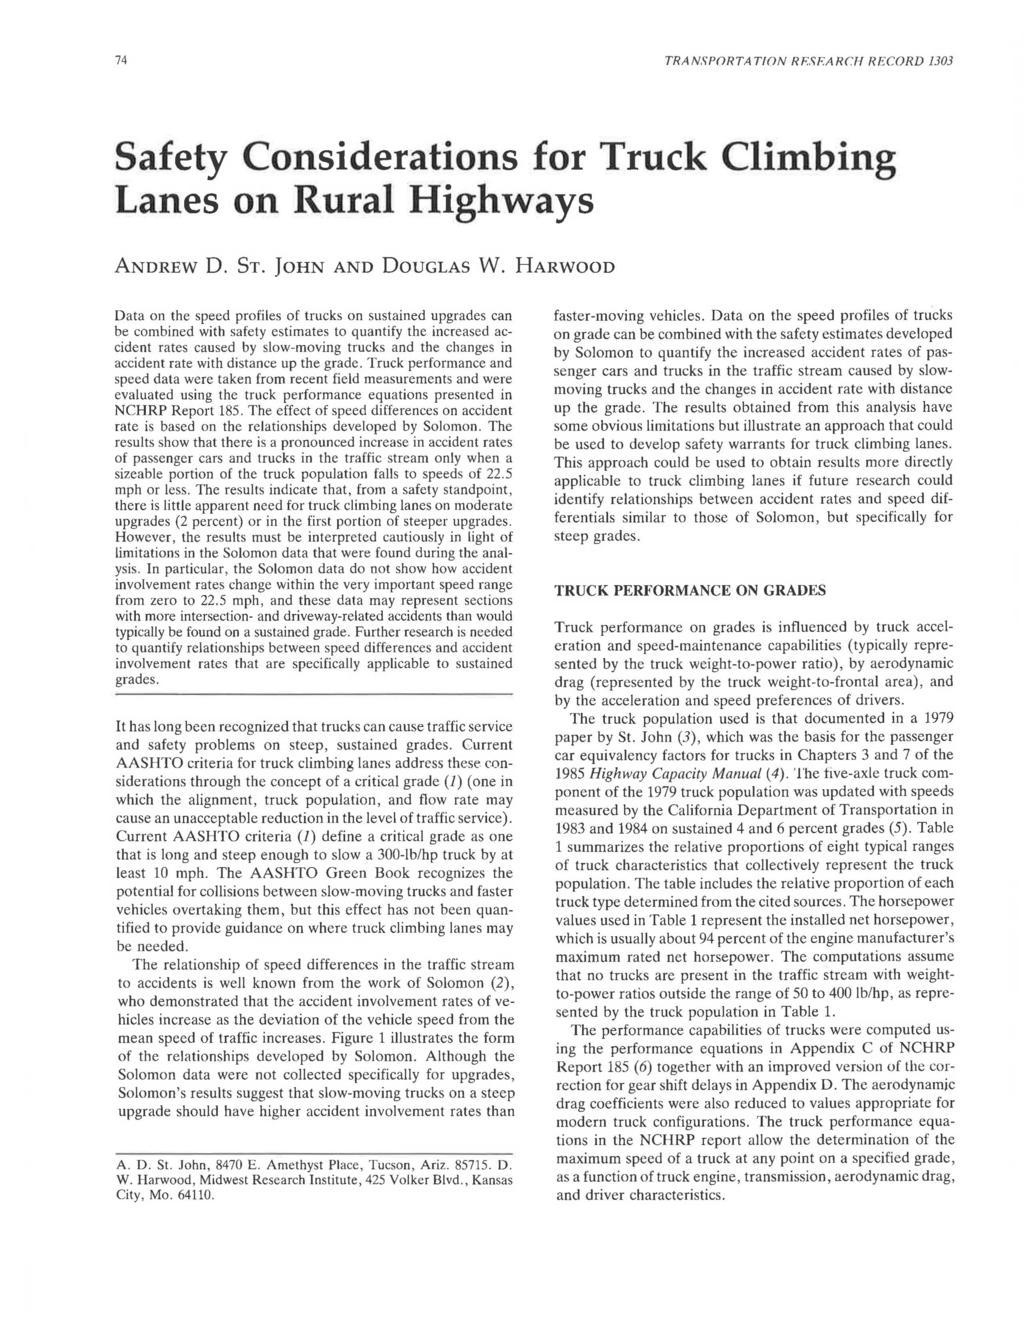 74 TRANSP()RTATl()N RF.SF.ARl.H RECORD 133 Safety Considerations for Truk Climbing Lanes on Rural Highways ANDREW D. ST. JOHN AND DOUGLAS w.